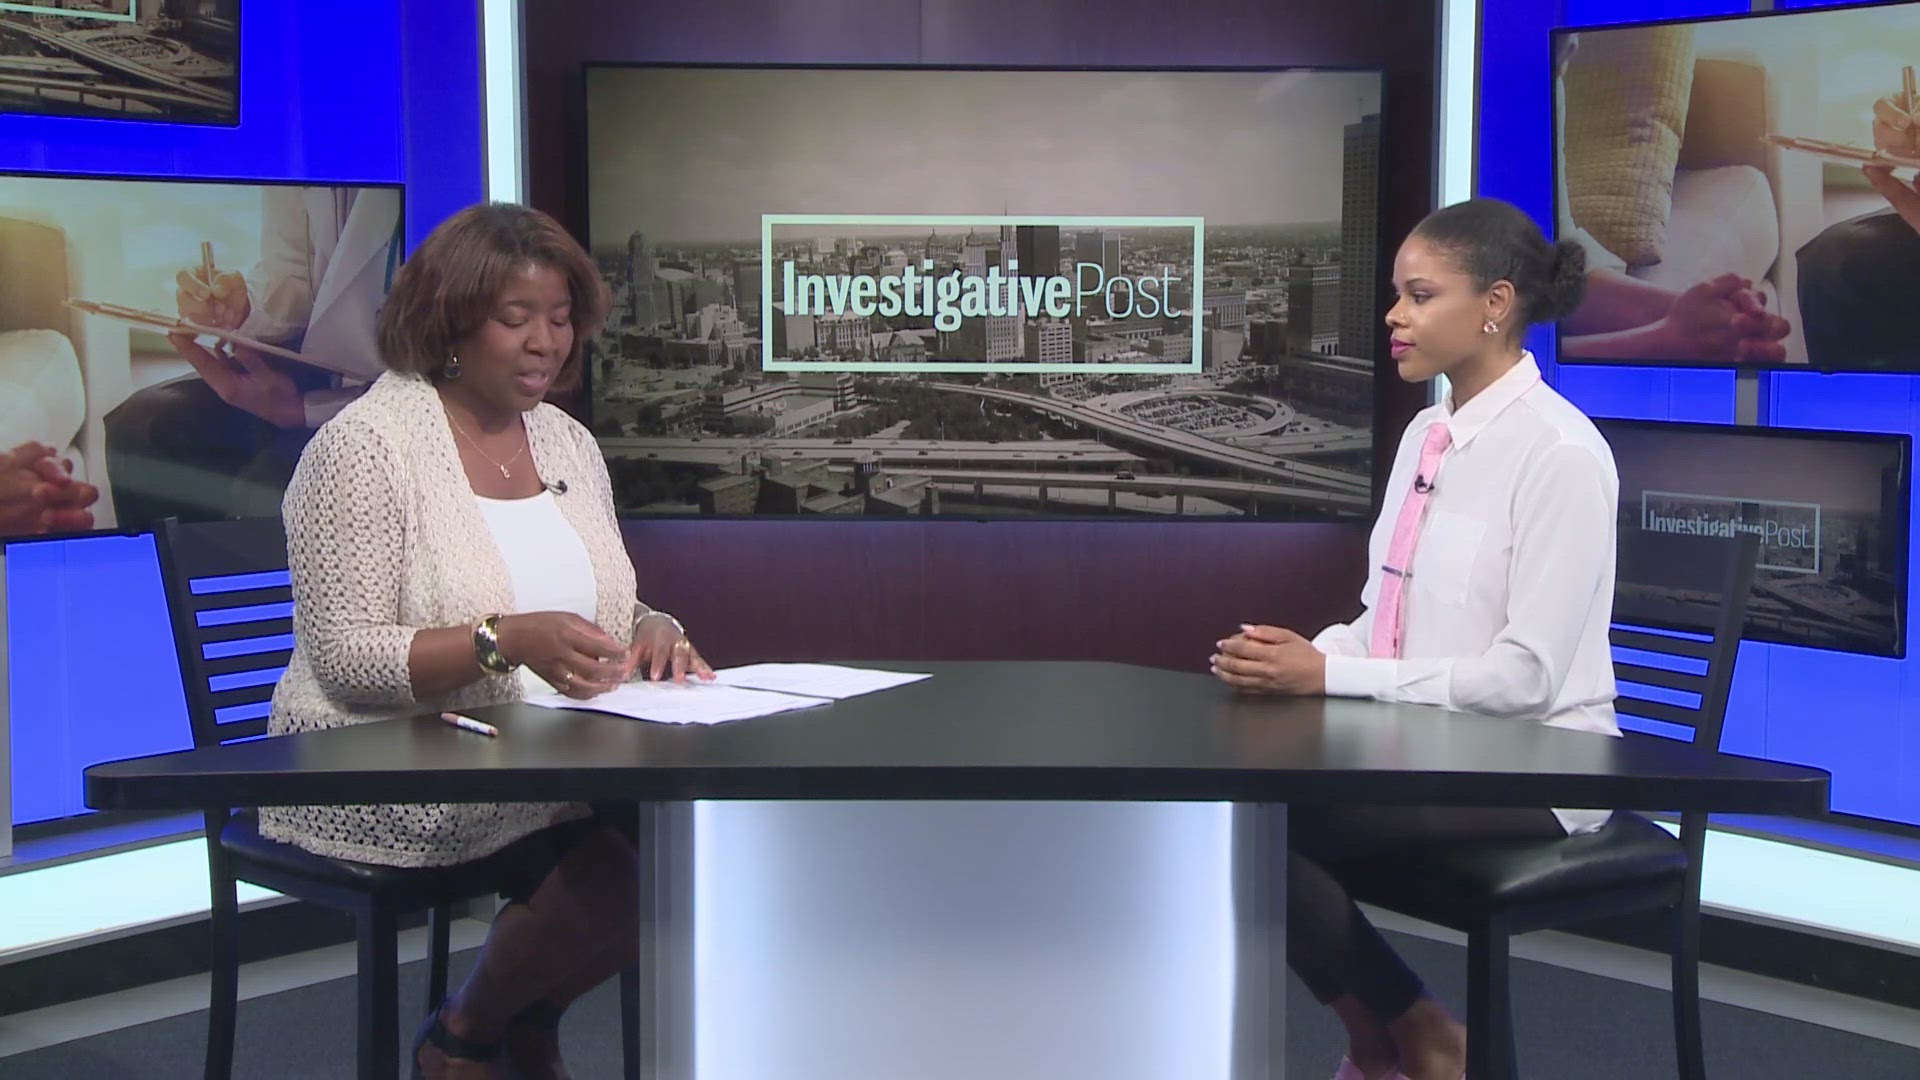 Joining me live in studio to discuss this different approach to revitalizing Buffalo's East Side is I'Jaz Ja'ciel.